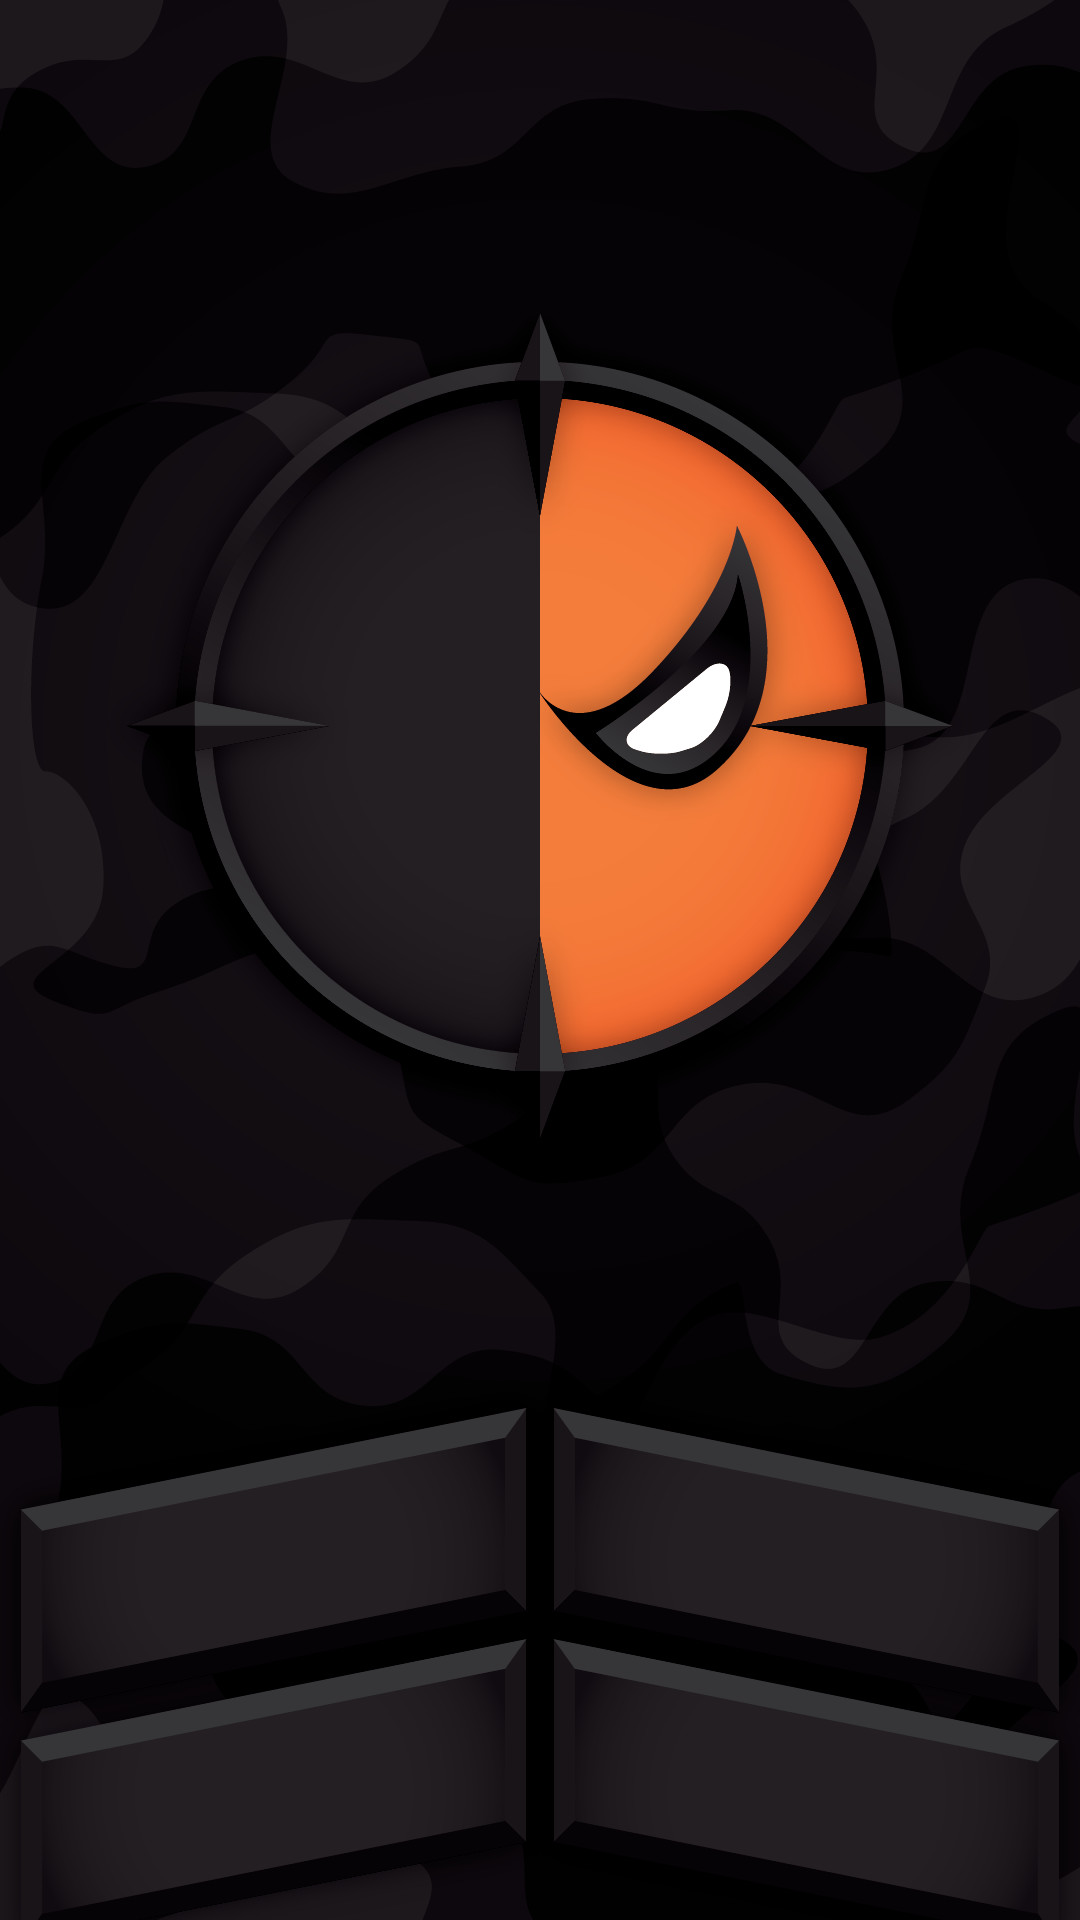 Someone asked for a Deathstroke wallpaper. I thought you guys would enjoy it